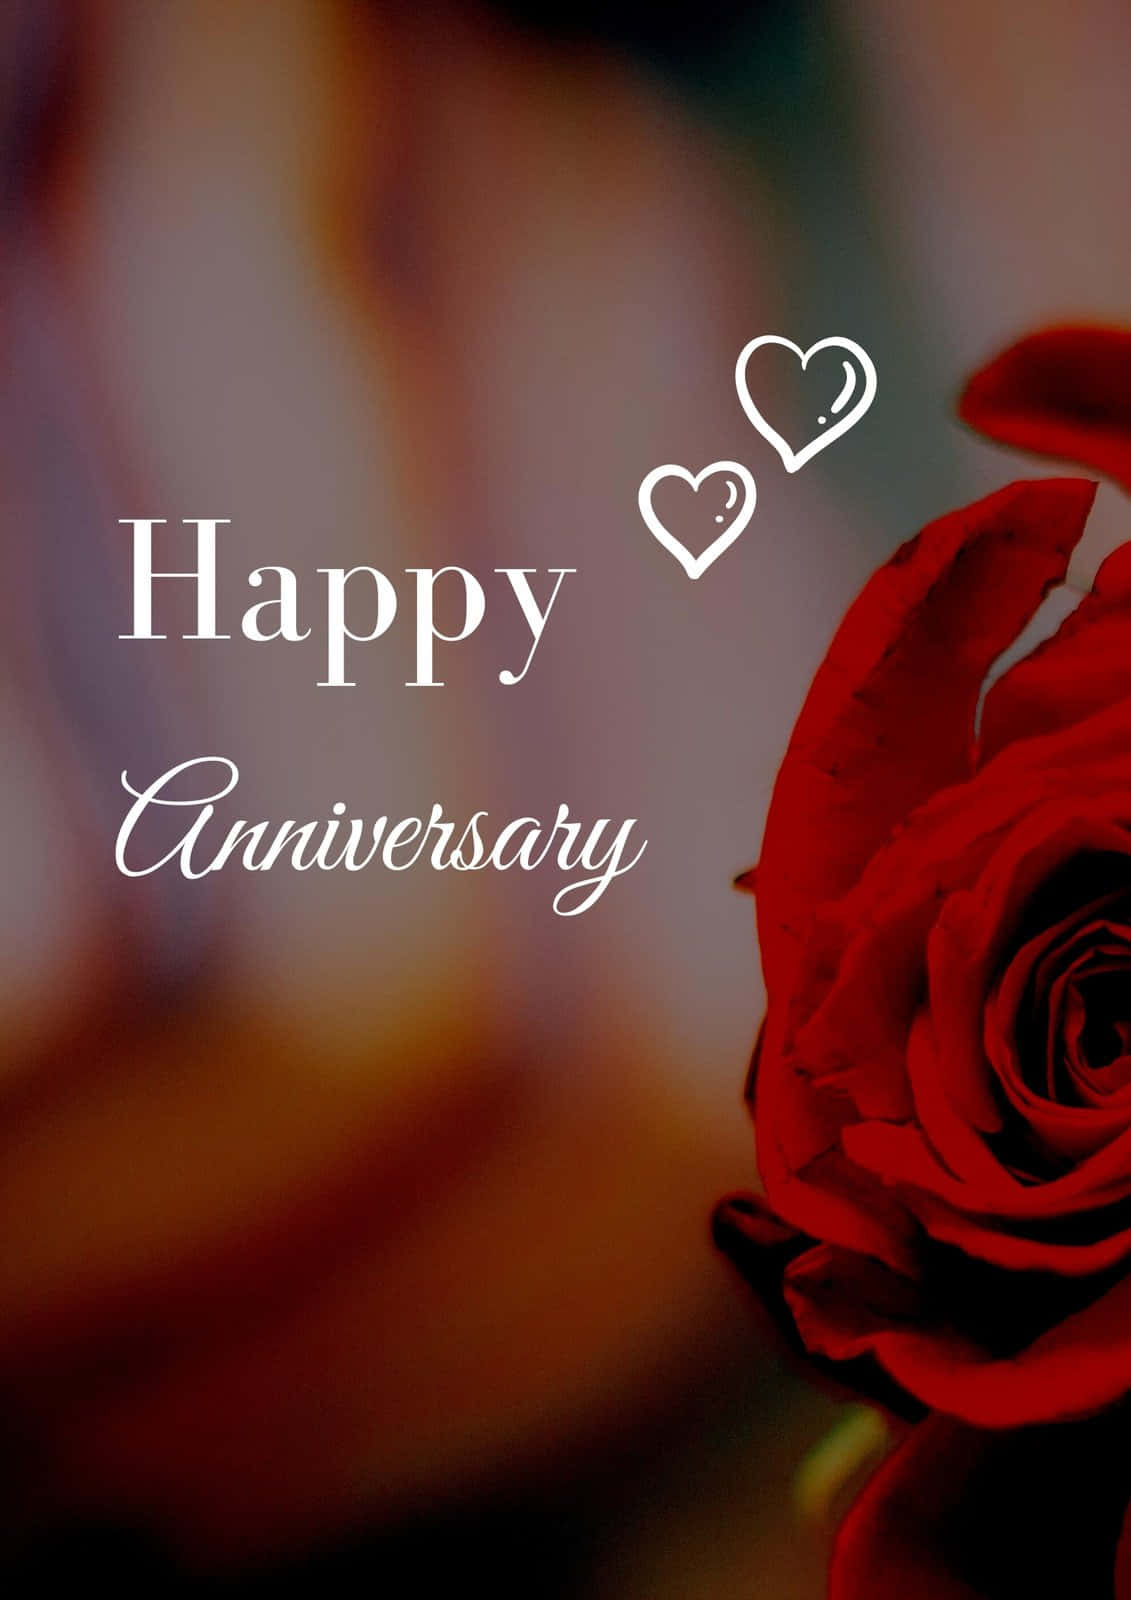 Anniversary With Elegant Red Rose Wallpaper